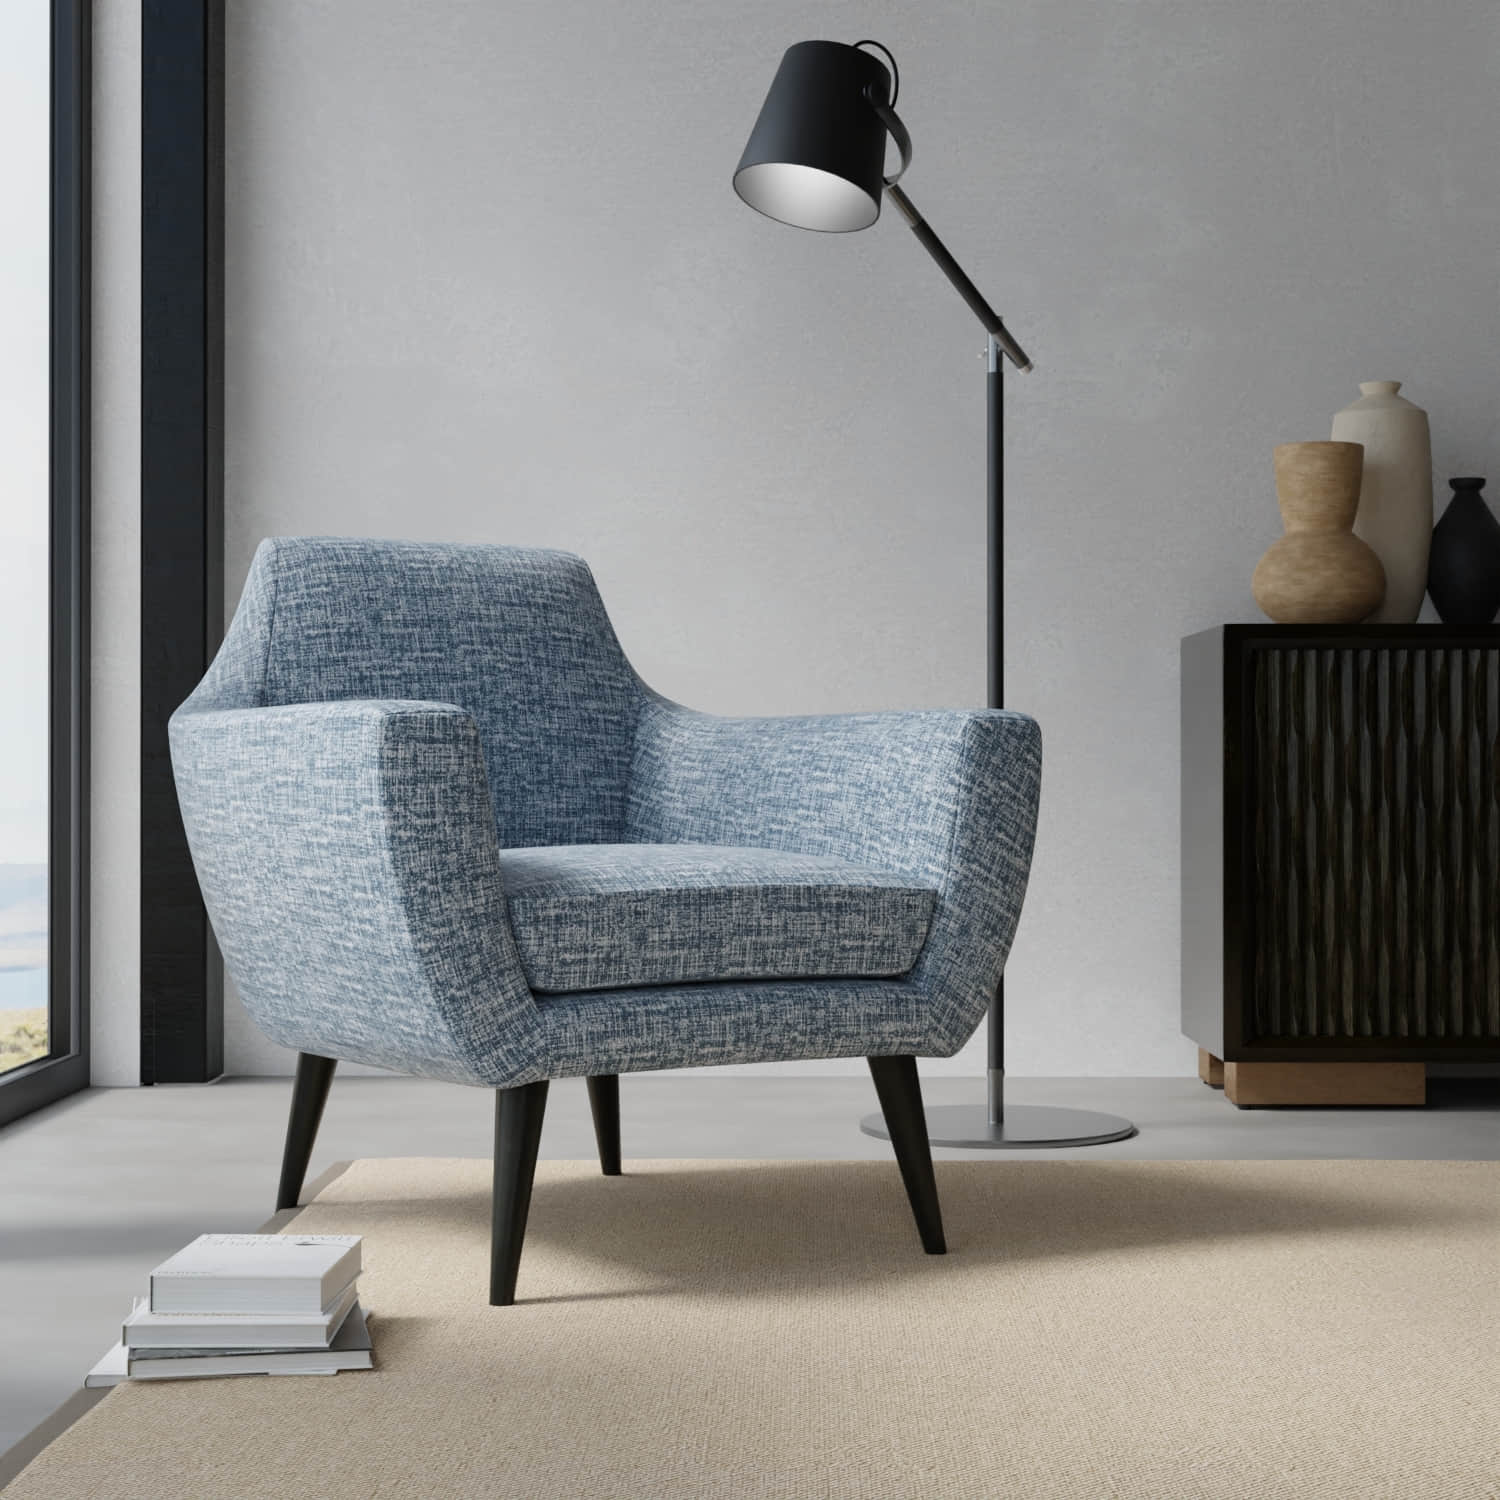 Callaway Denim upholstered on a contemporary chair